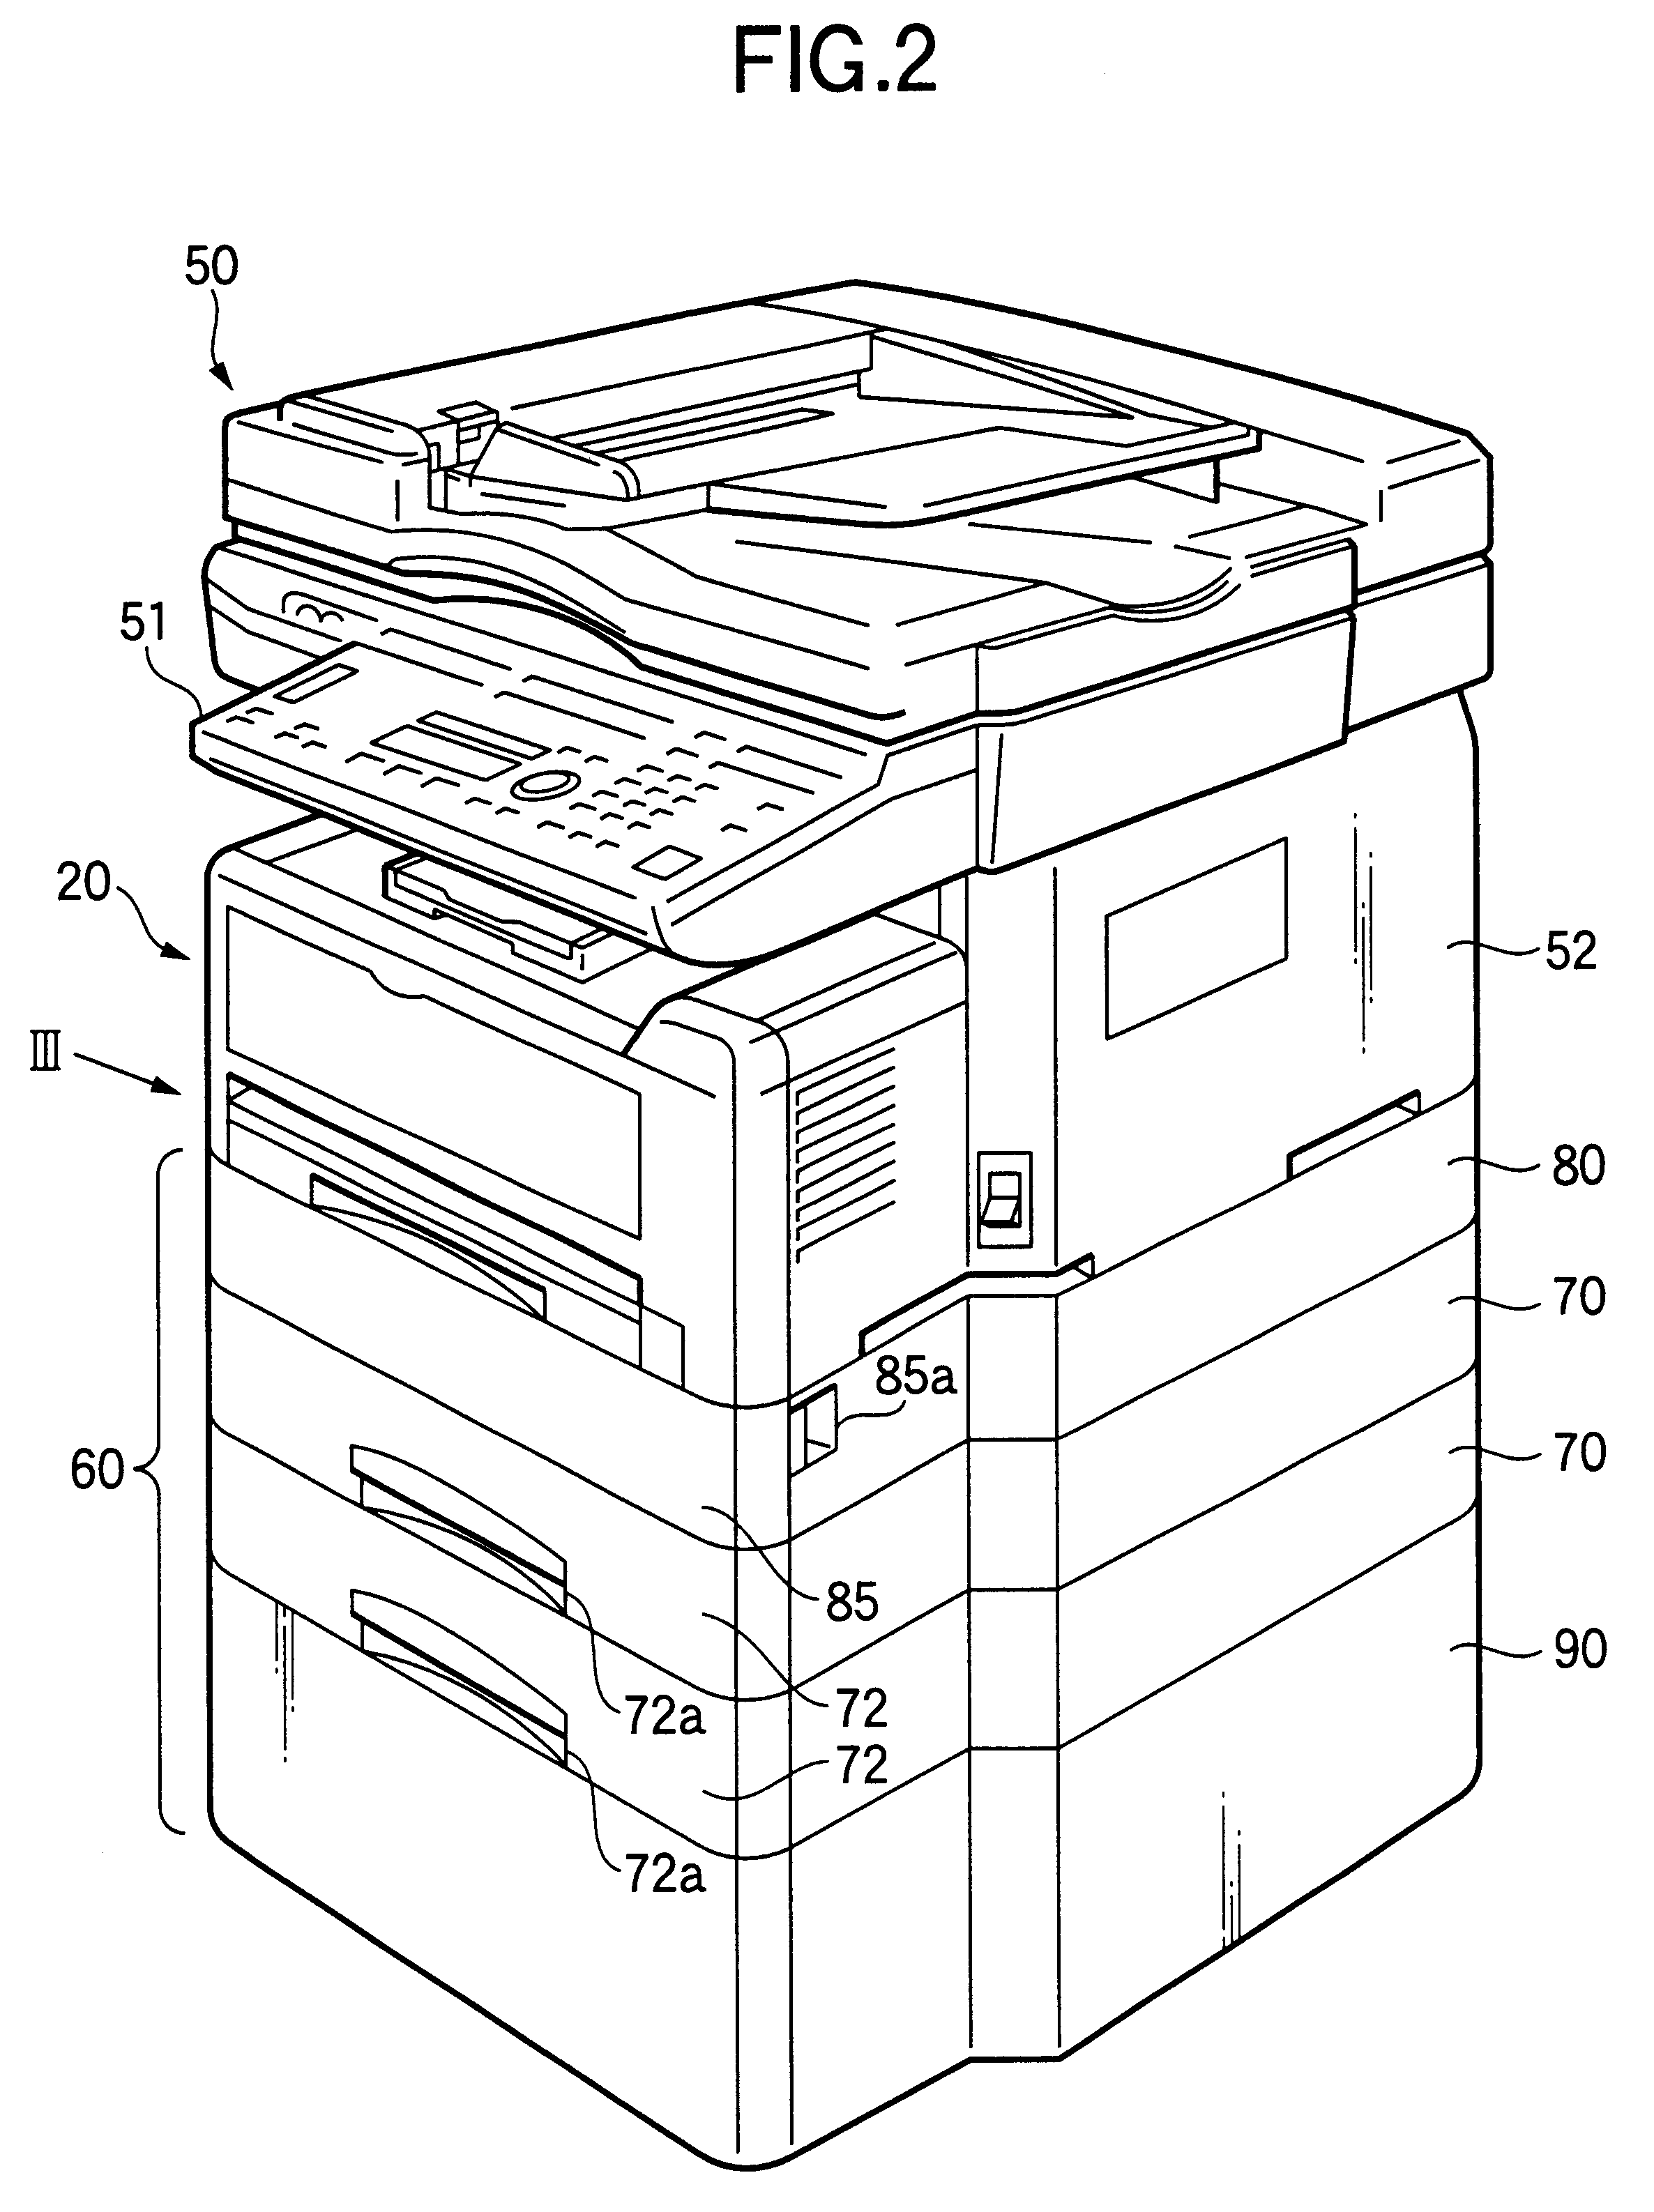 Image forming apparatus and sheet feeder